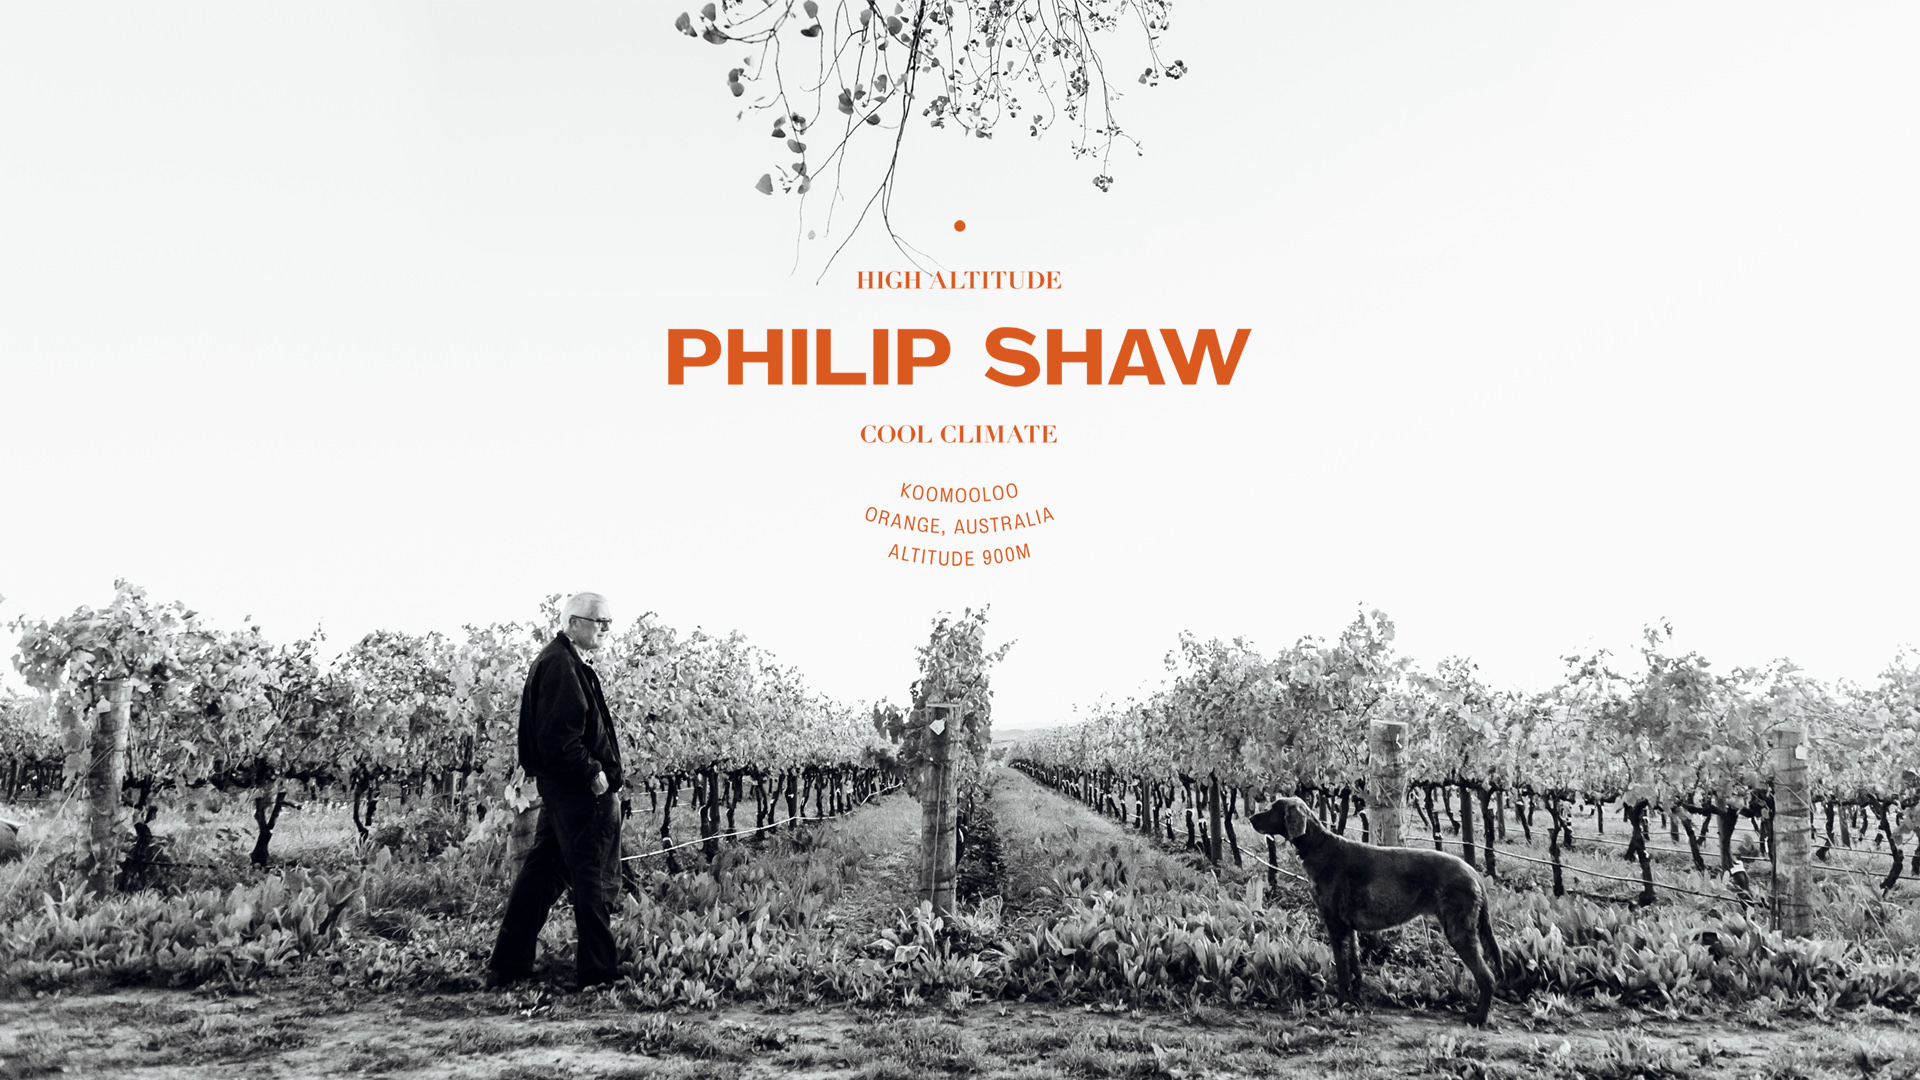 Philip Shaw and his dog walking in the Koomooloo Vineyard, Orange NSW. Black and white photograph features a Philip Shaw logotype superimposed in the sky above figures. Image created by Helium Graphic Design Melbourne.